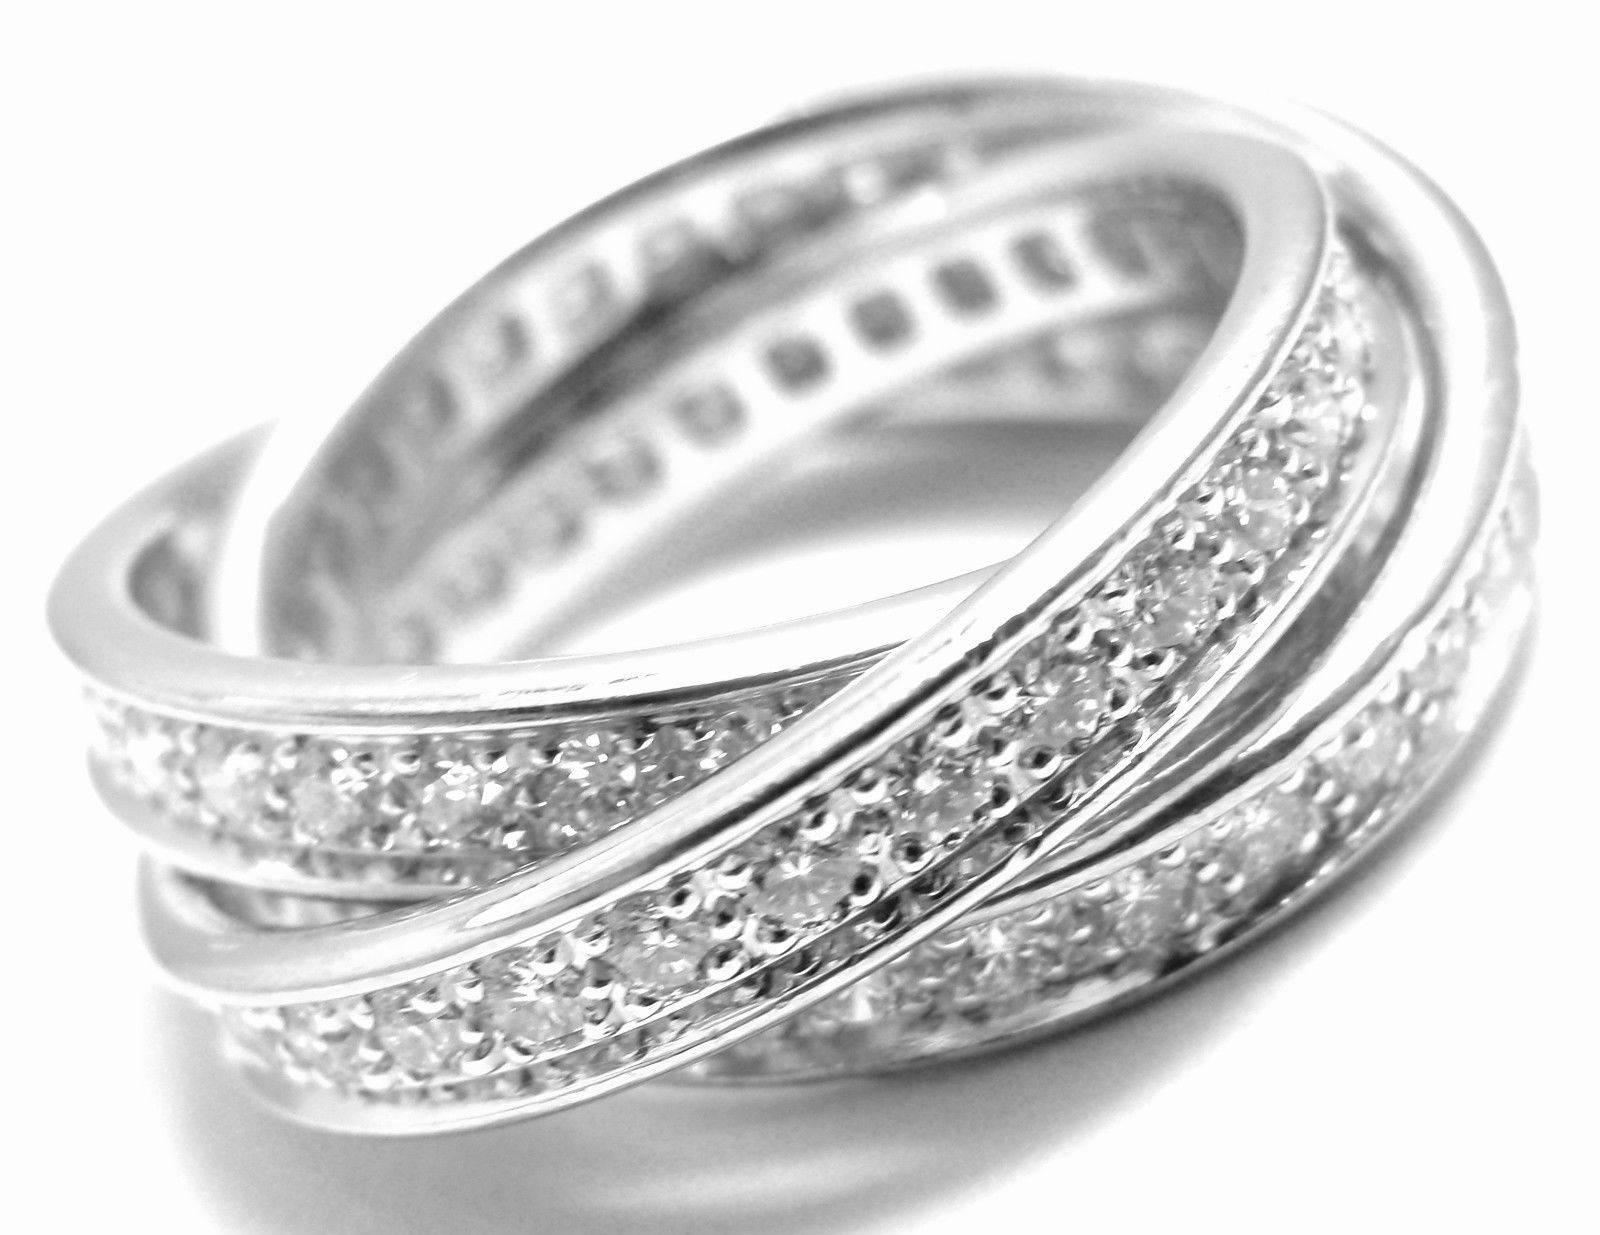 18k White Gold Diamond Trinity Band Ring by Cartier.  
With 96 Round Brilliant cut diamonds VVS1 clarity, F-H color total weight approx. 1.55ct  
This ring comes with Cartier box.  
Details:  
Size: European 52 US 6 
Weight: 9.5 grams  
Width: